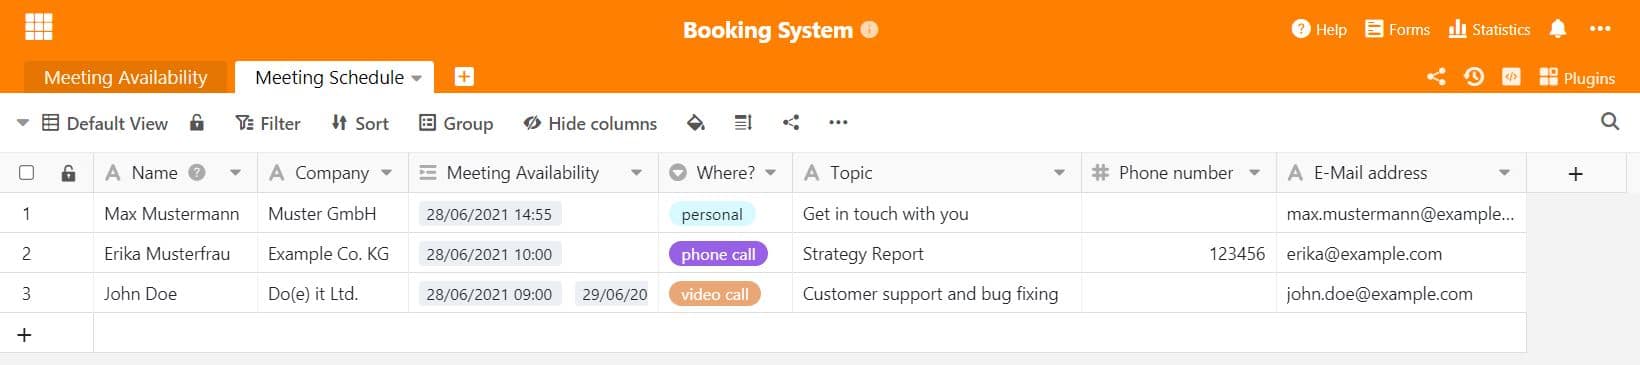 This table is particularly relevant for your booking system, as the booking system is designed with these columns